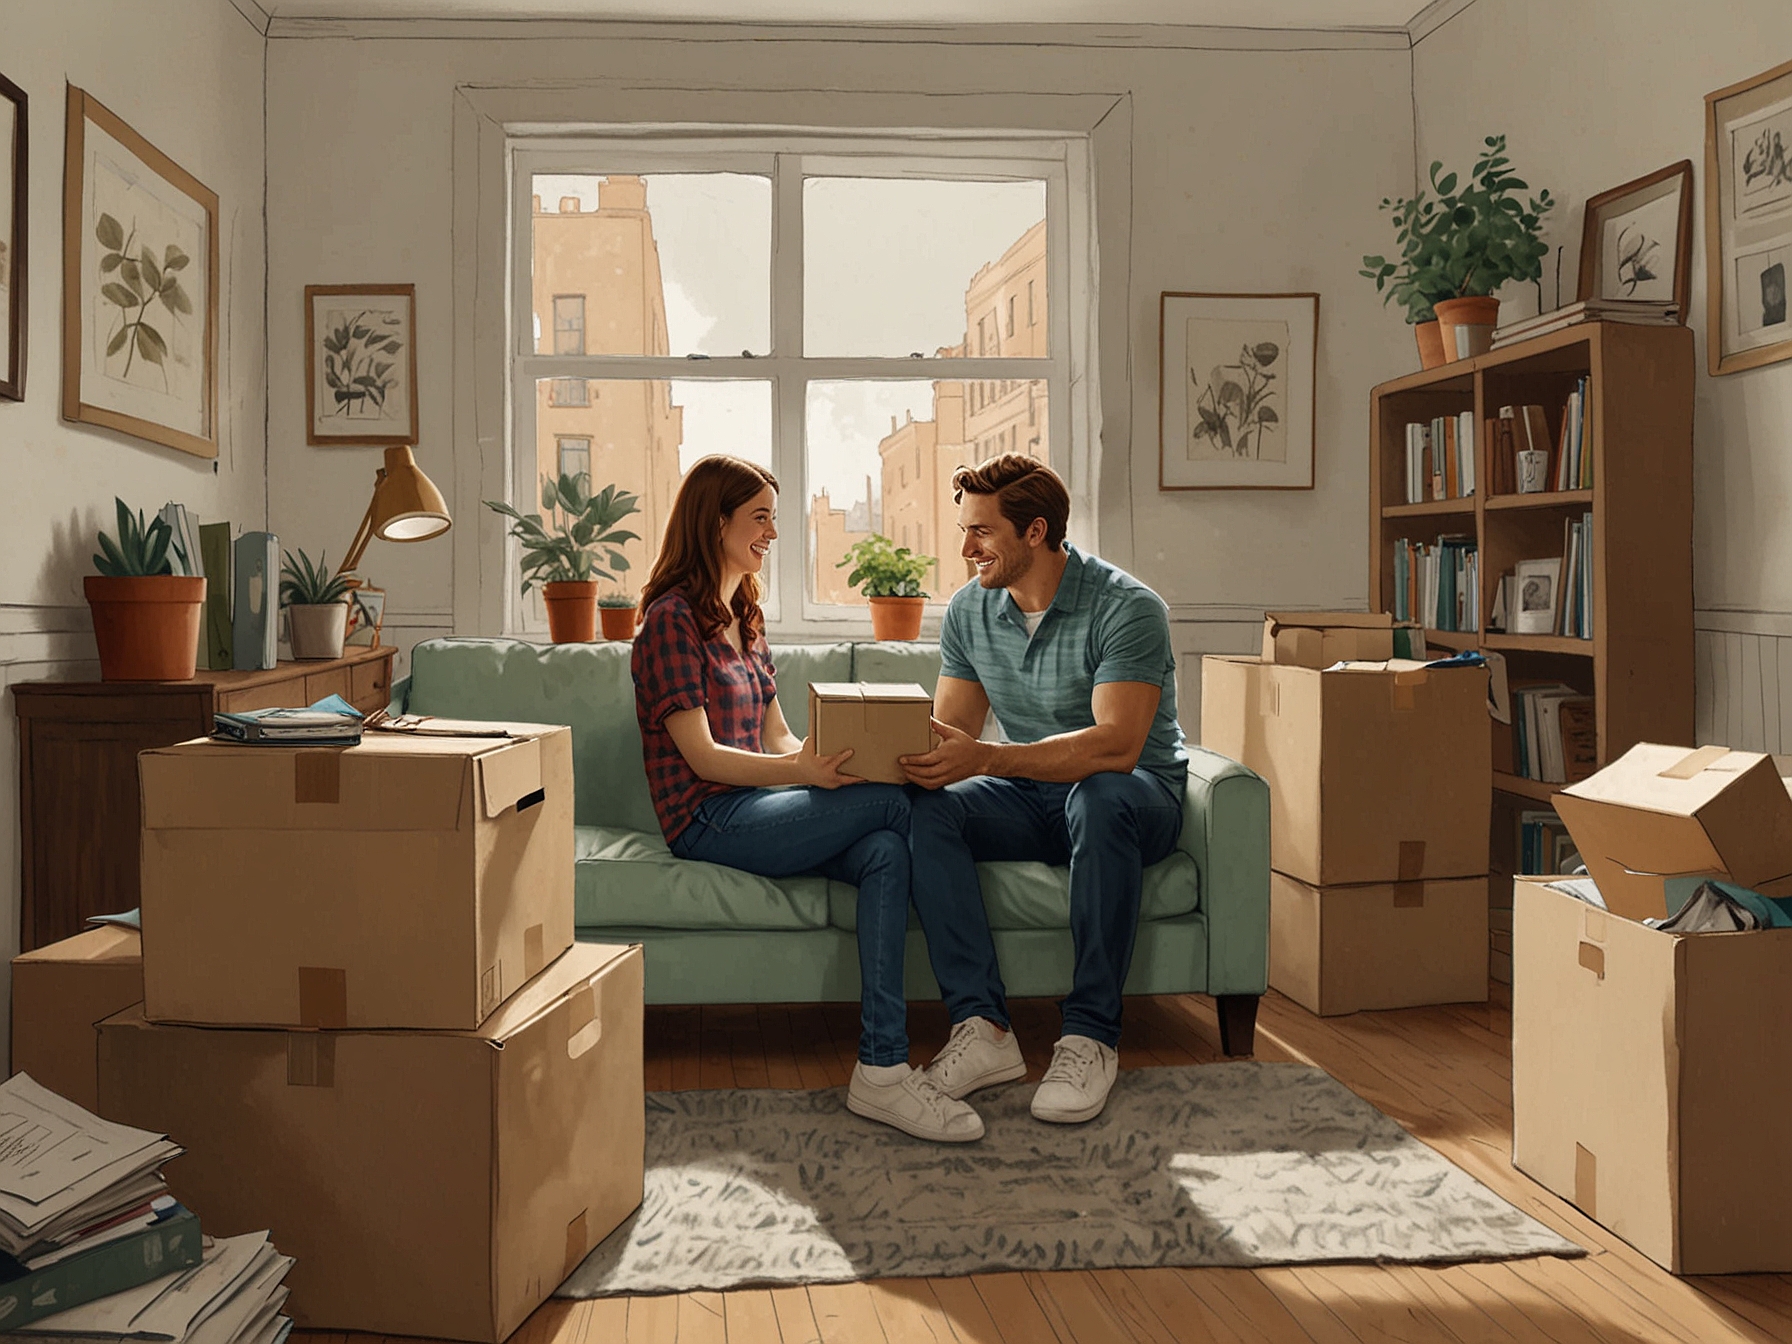 Lucia Hawley and Henry Poole smiling as they pack boxes in their new shared apartment, surrounded by moving supplies, showcasing their excitement about this new chapter in their relationship.